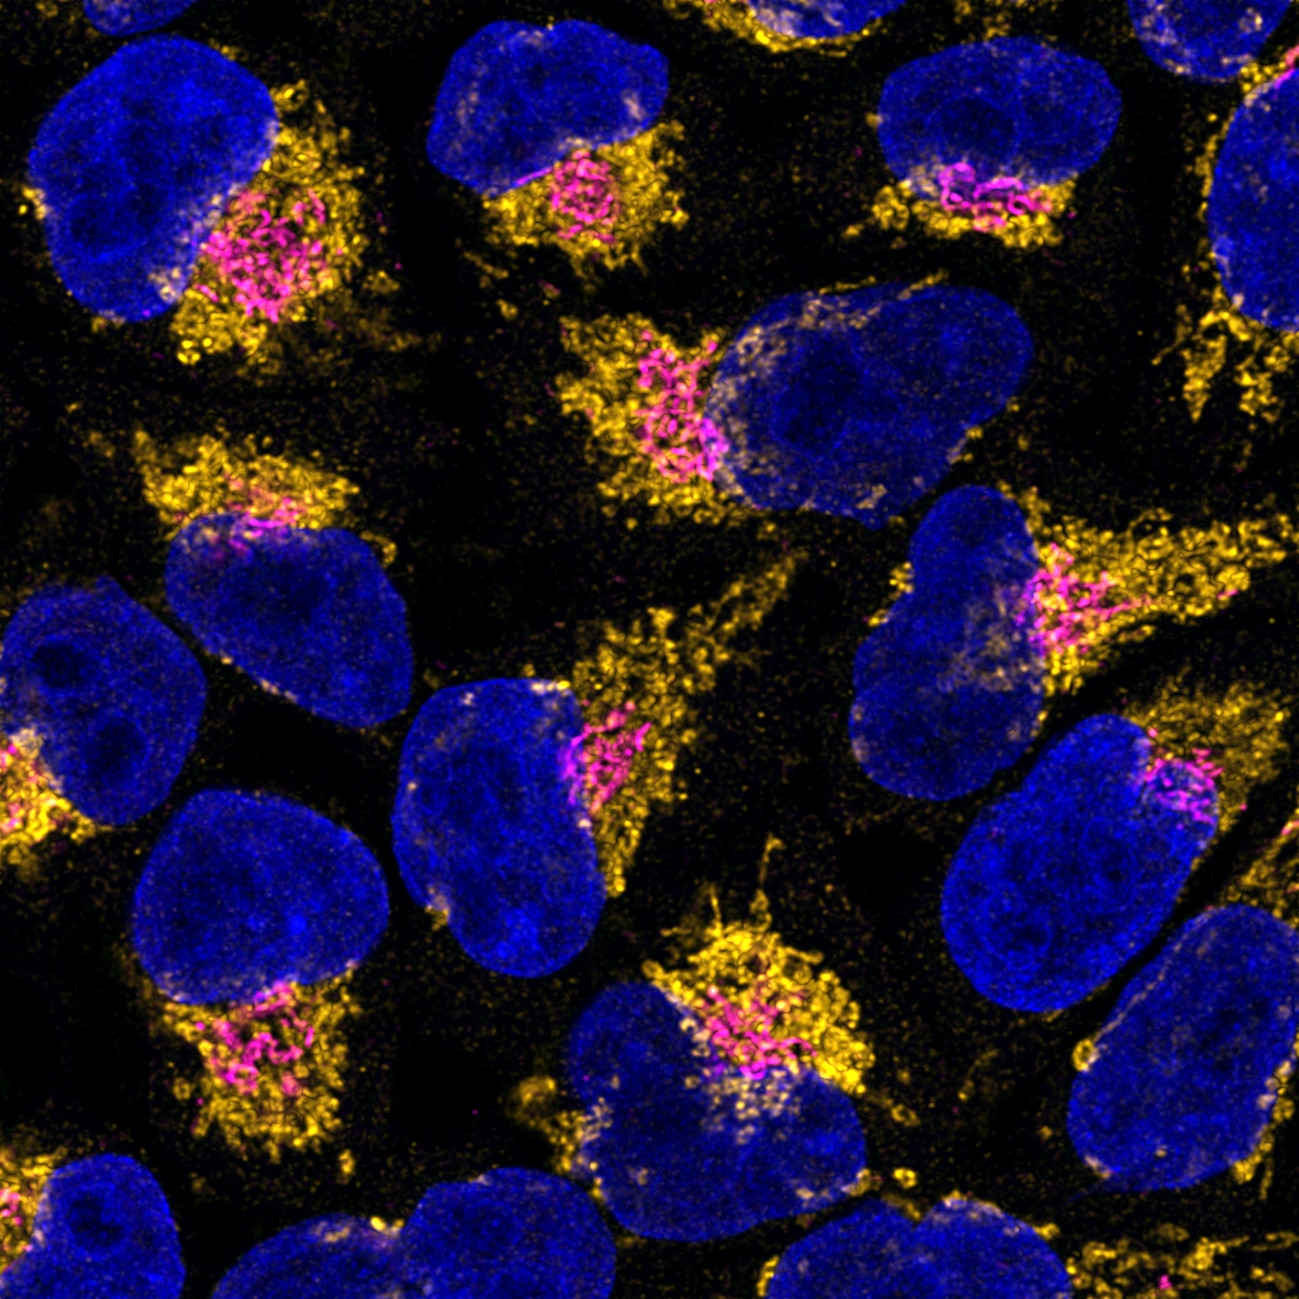 Immunofluorescence of HeLa: PFA-fixed HeLa cells were stained with anti-COXIV antibody (11242-1-AP) labeled with FlexAble CoraLite® Plus 555 Kit (KFA002, yellow), anti-GM130 antibody (11308-1-AP) labeled with FlexAble CoraLite® Plus 647 Kit (KFA003, magenta) and DAPI (blue). Confocal images were acquired with a 100x oil objective and post-processed. Images were recorded at the Core Facility Bioimaging at the Biomedical Center, LMU Munich.